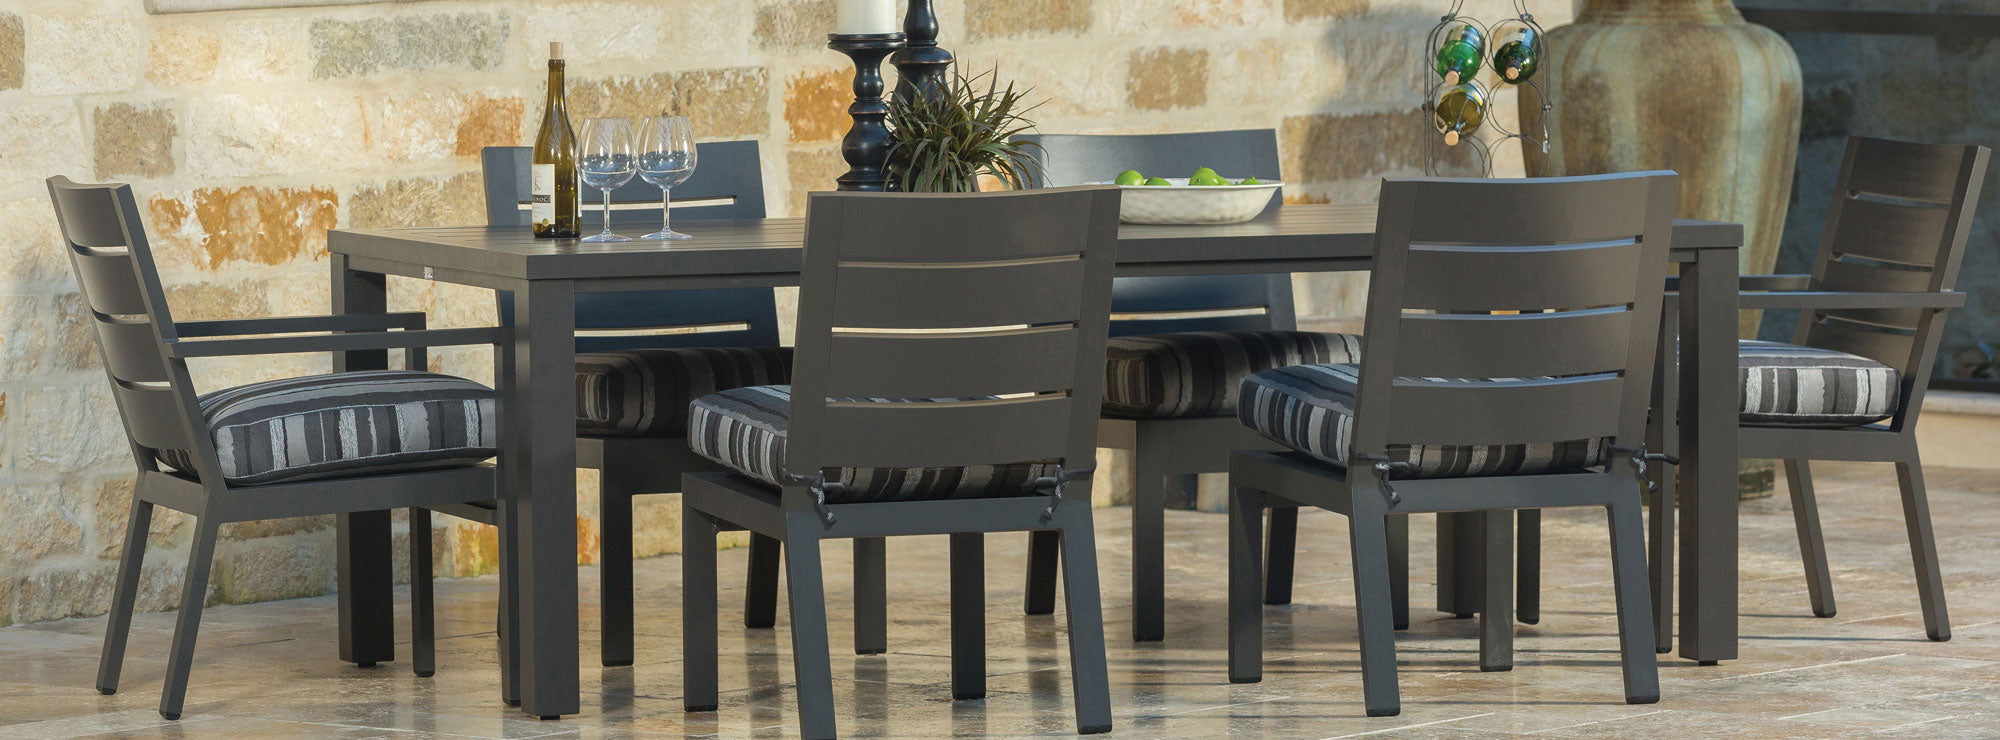 Palermo Aluminum Patio Dining Set by Ebel